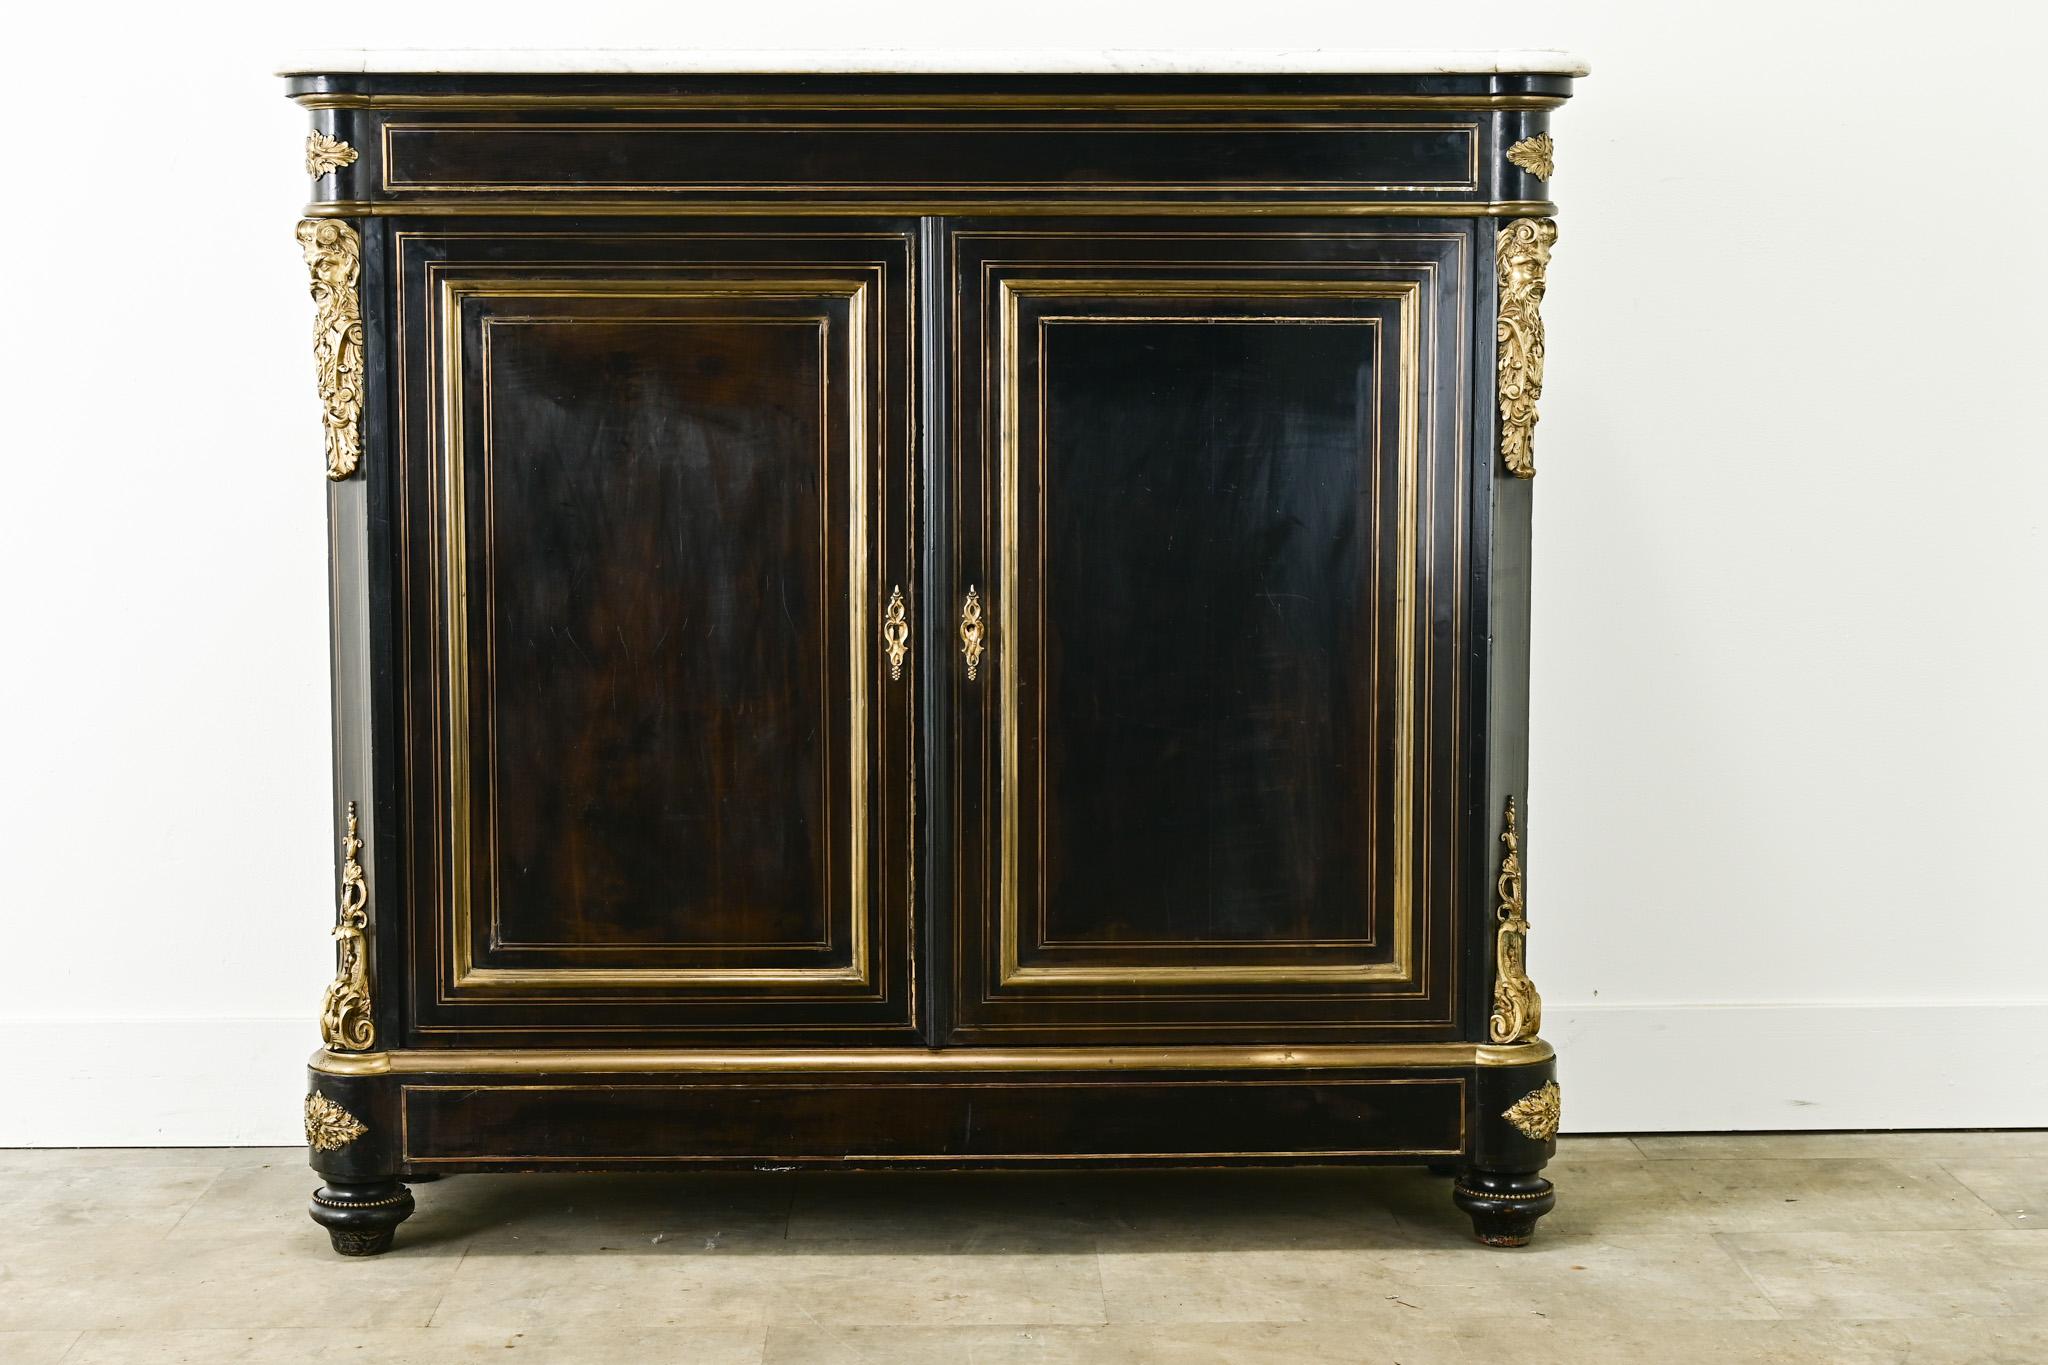 A tall French ebonized & ormolu buffet in the Louis XVI Style. This buffet has its original worn white marble top with rounded front corners that mimic the design of the base. The cabinet has a worn ebonized mahogany finish with impressive gilt